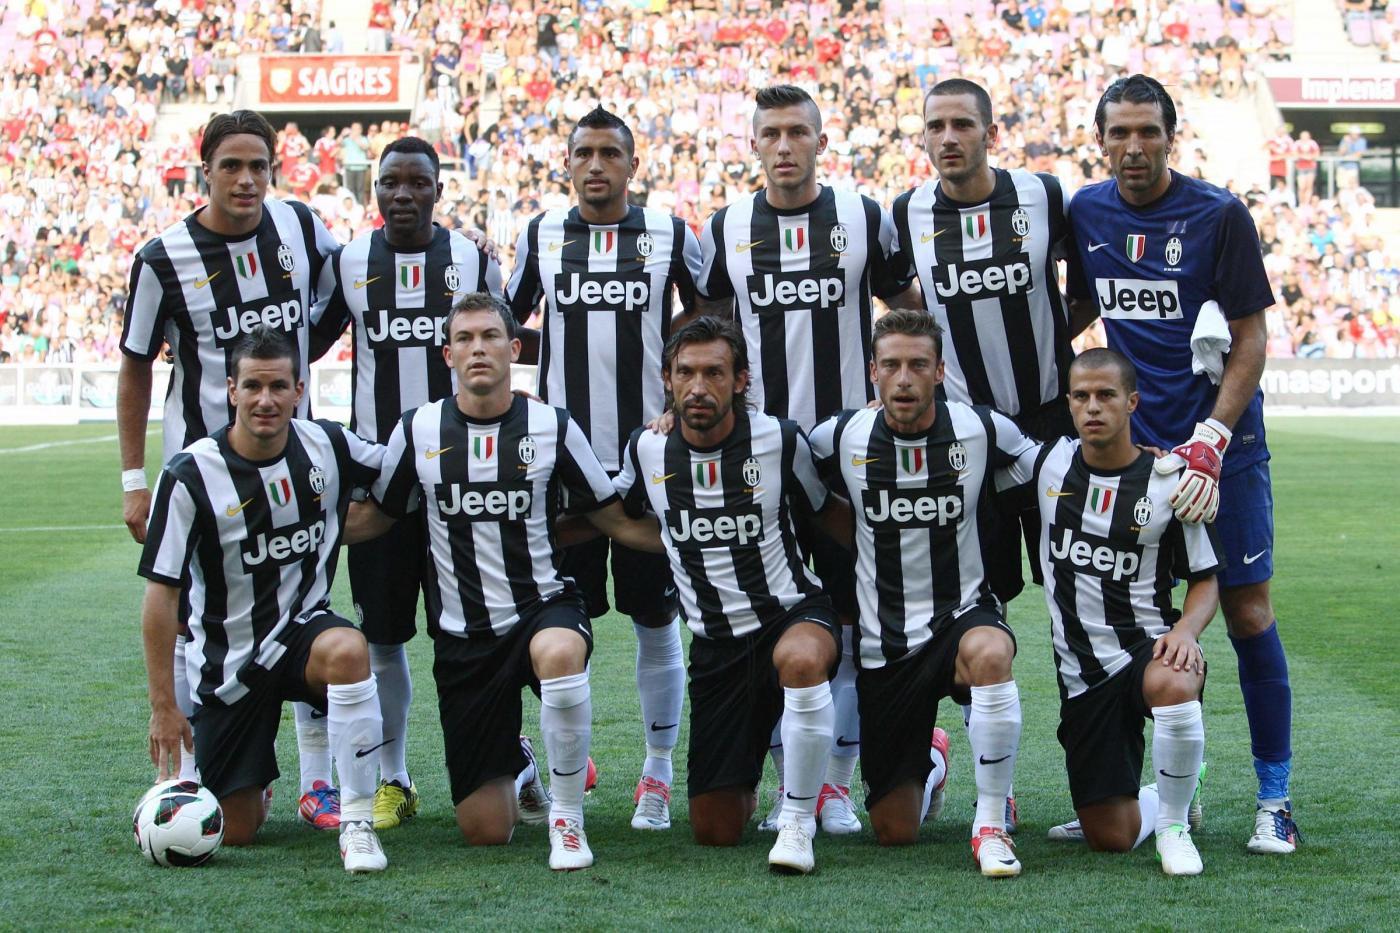 juventus team football image high resolution picture